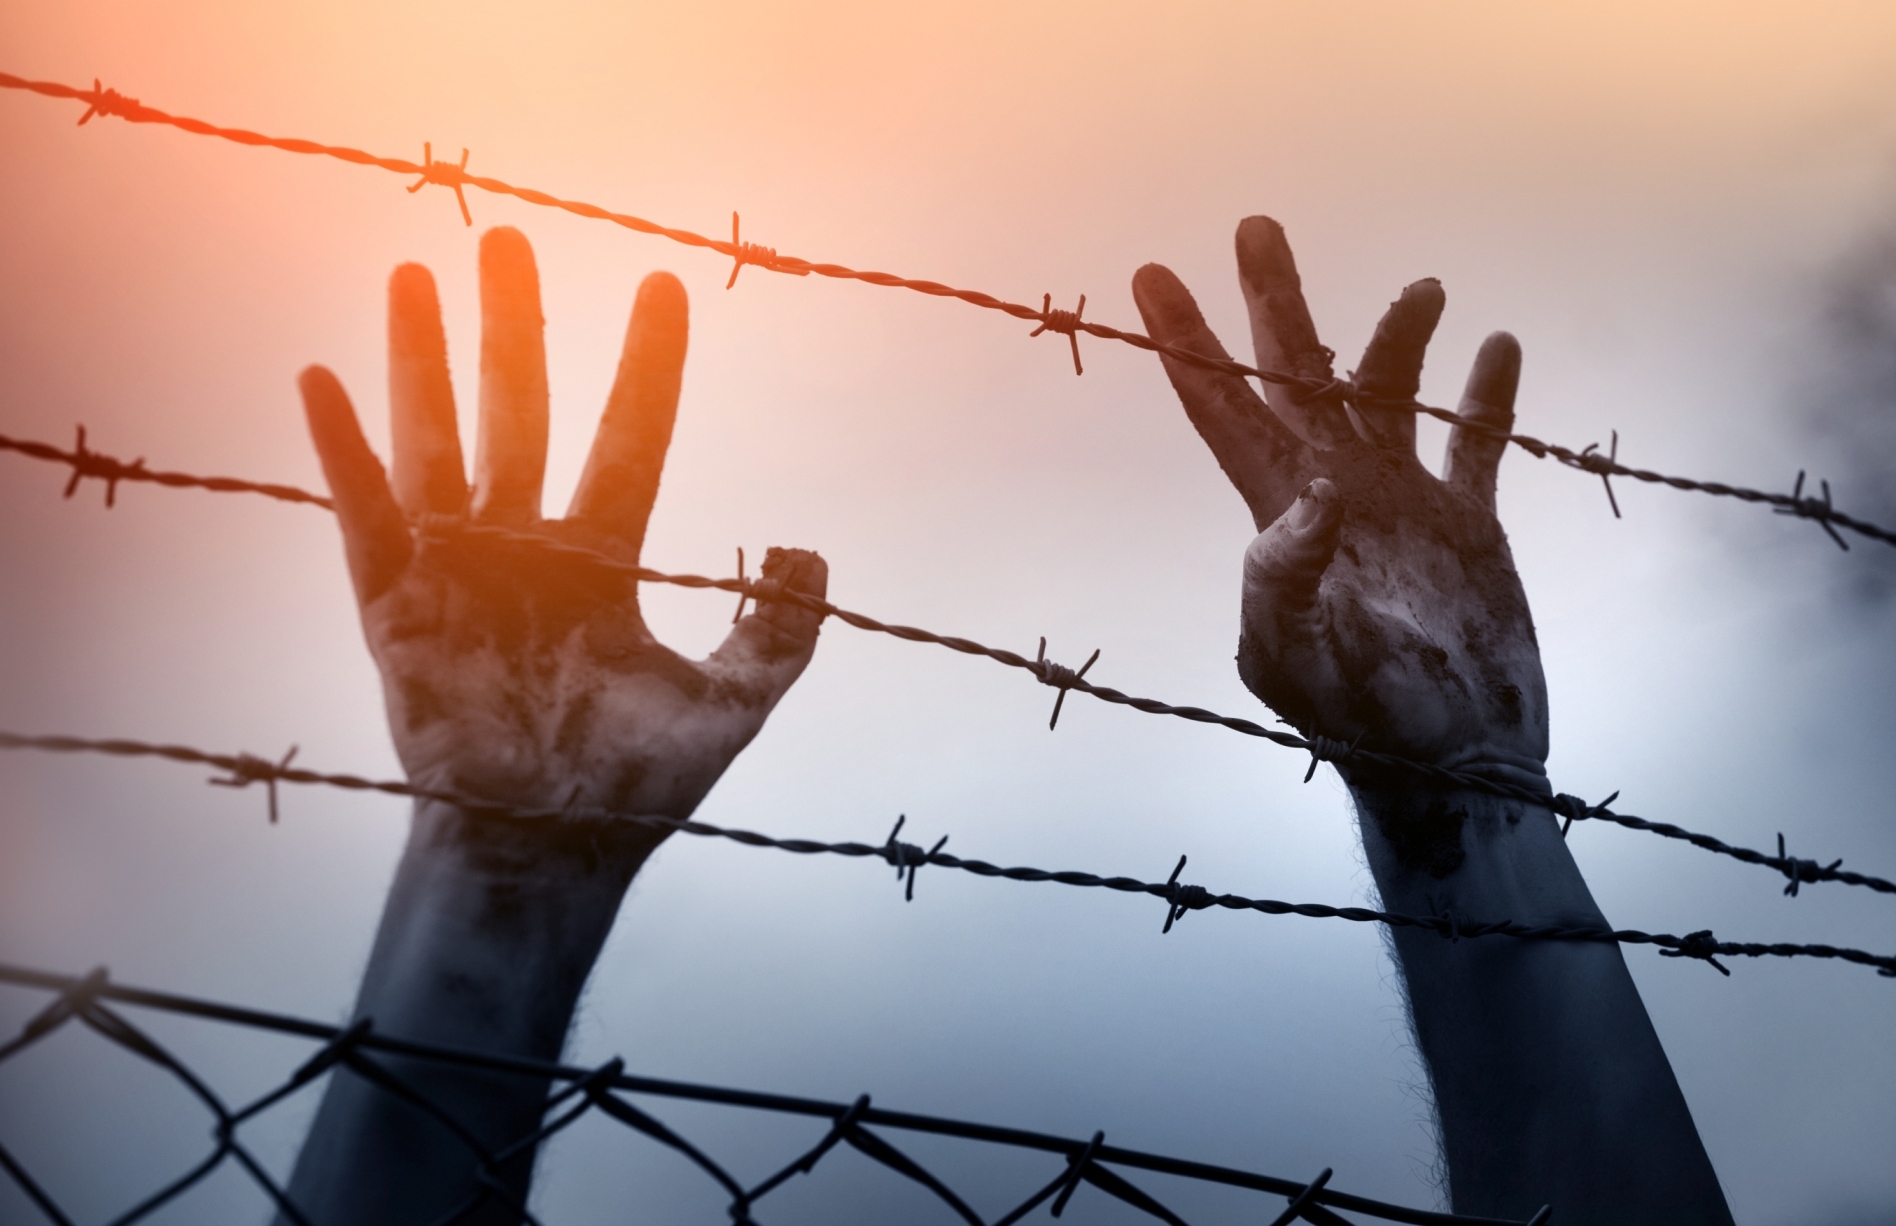 Hands at a Barbed Wire